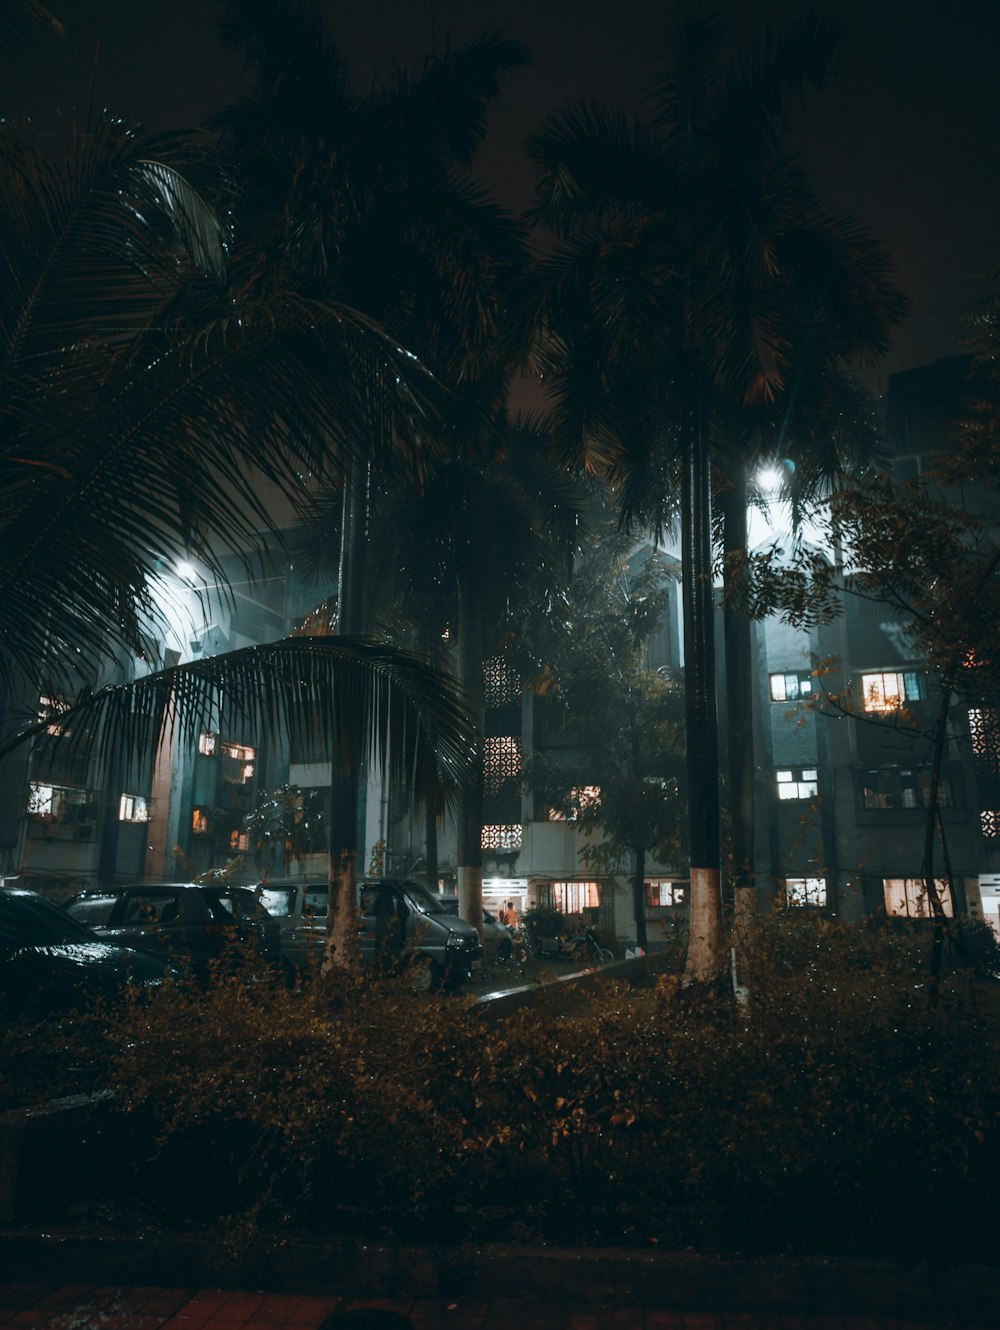 a night scene of a building with palm trees in the foreground